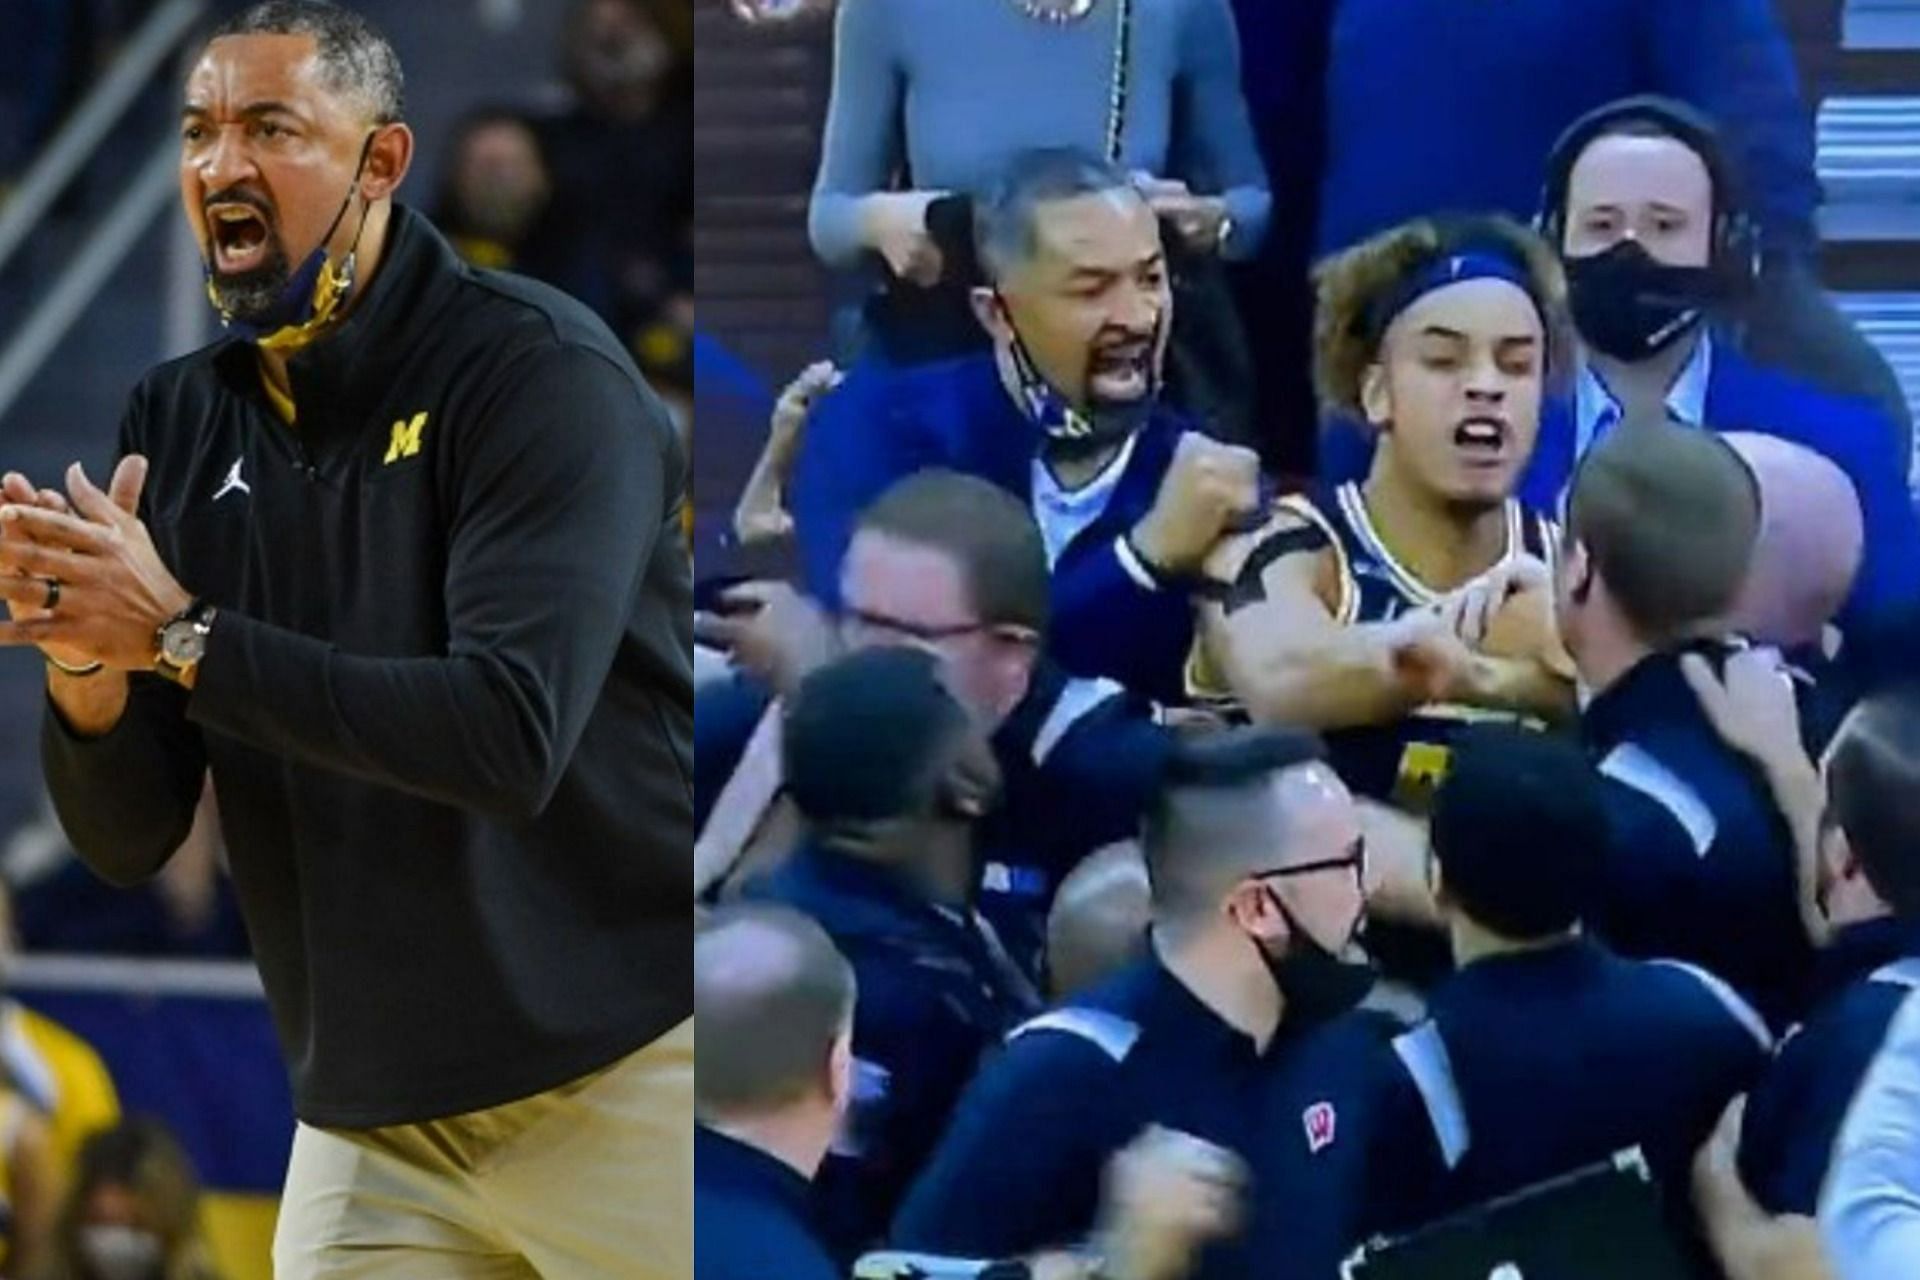 Michigan Wolverines coach Juwan Howard causes brawl post-game (Image via Getty Images &amp; MGRADS/Twitter)